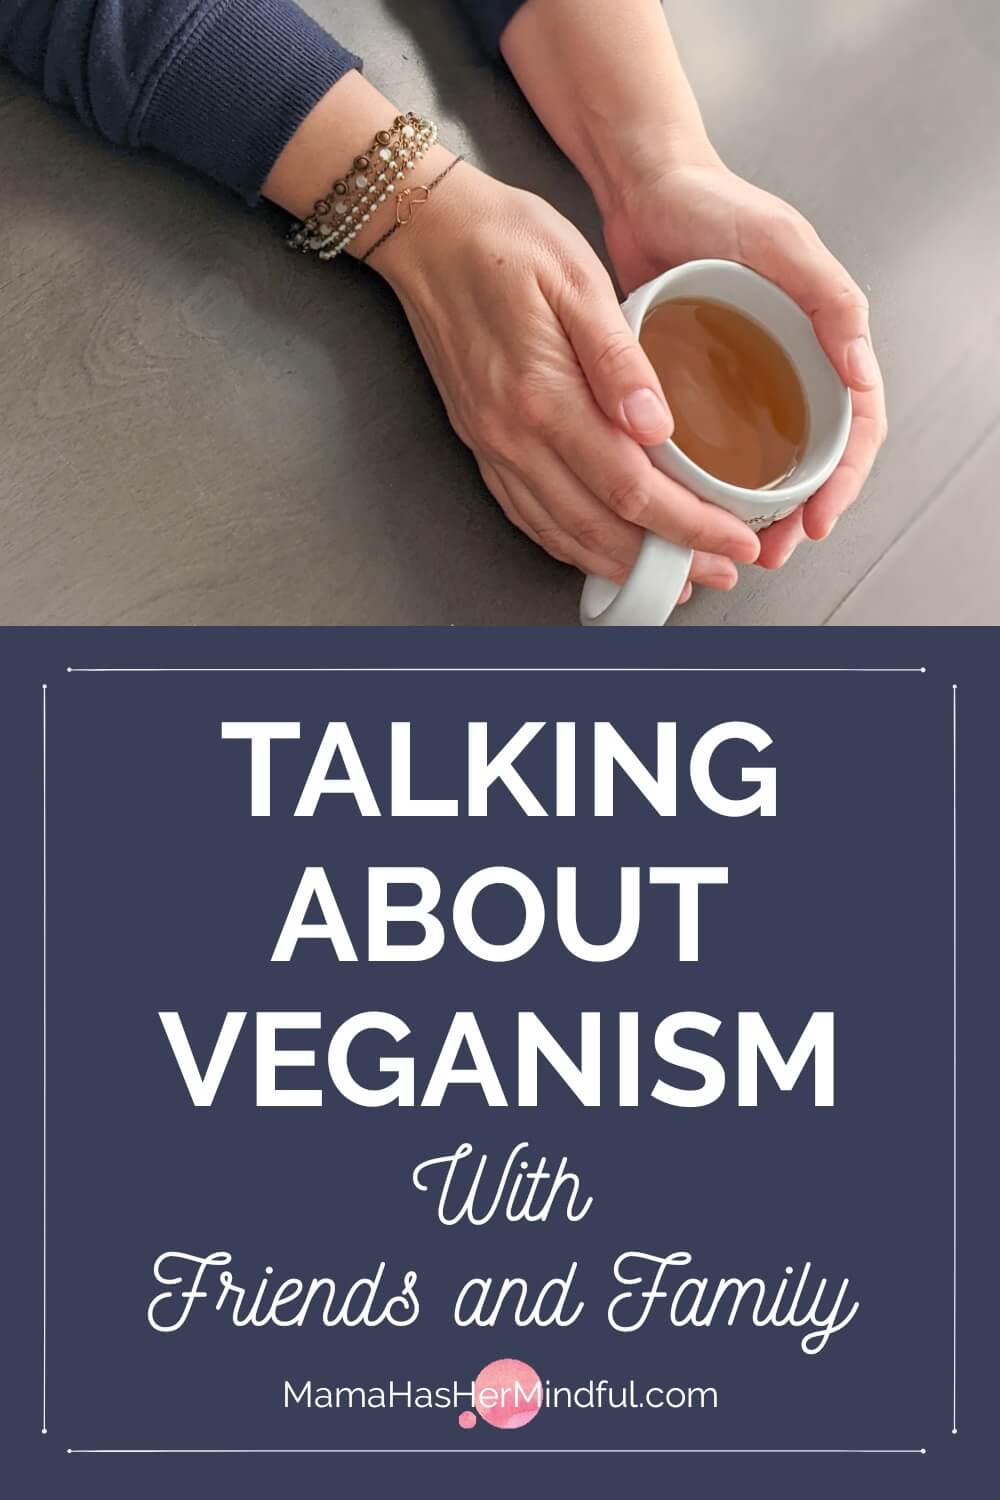 How to Mindfully Talk About Veganism with Friends and Family